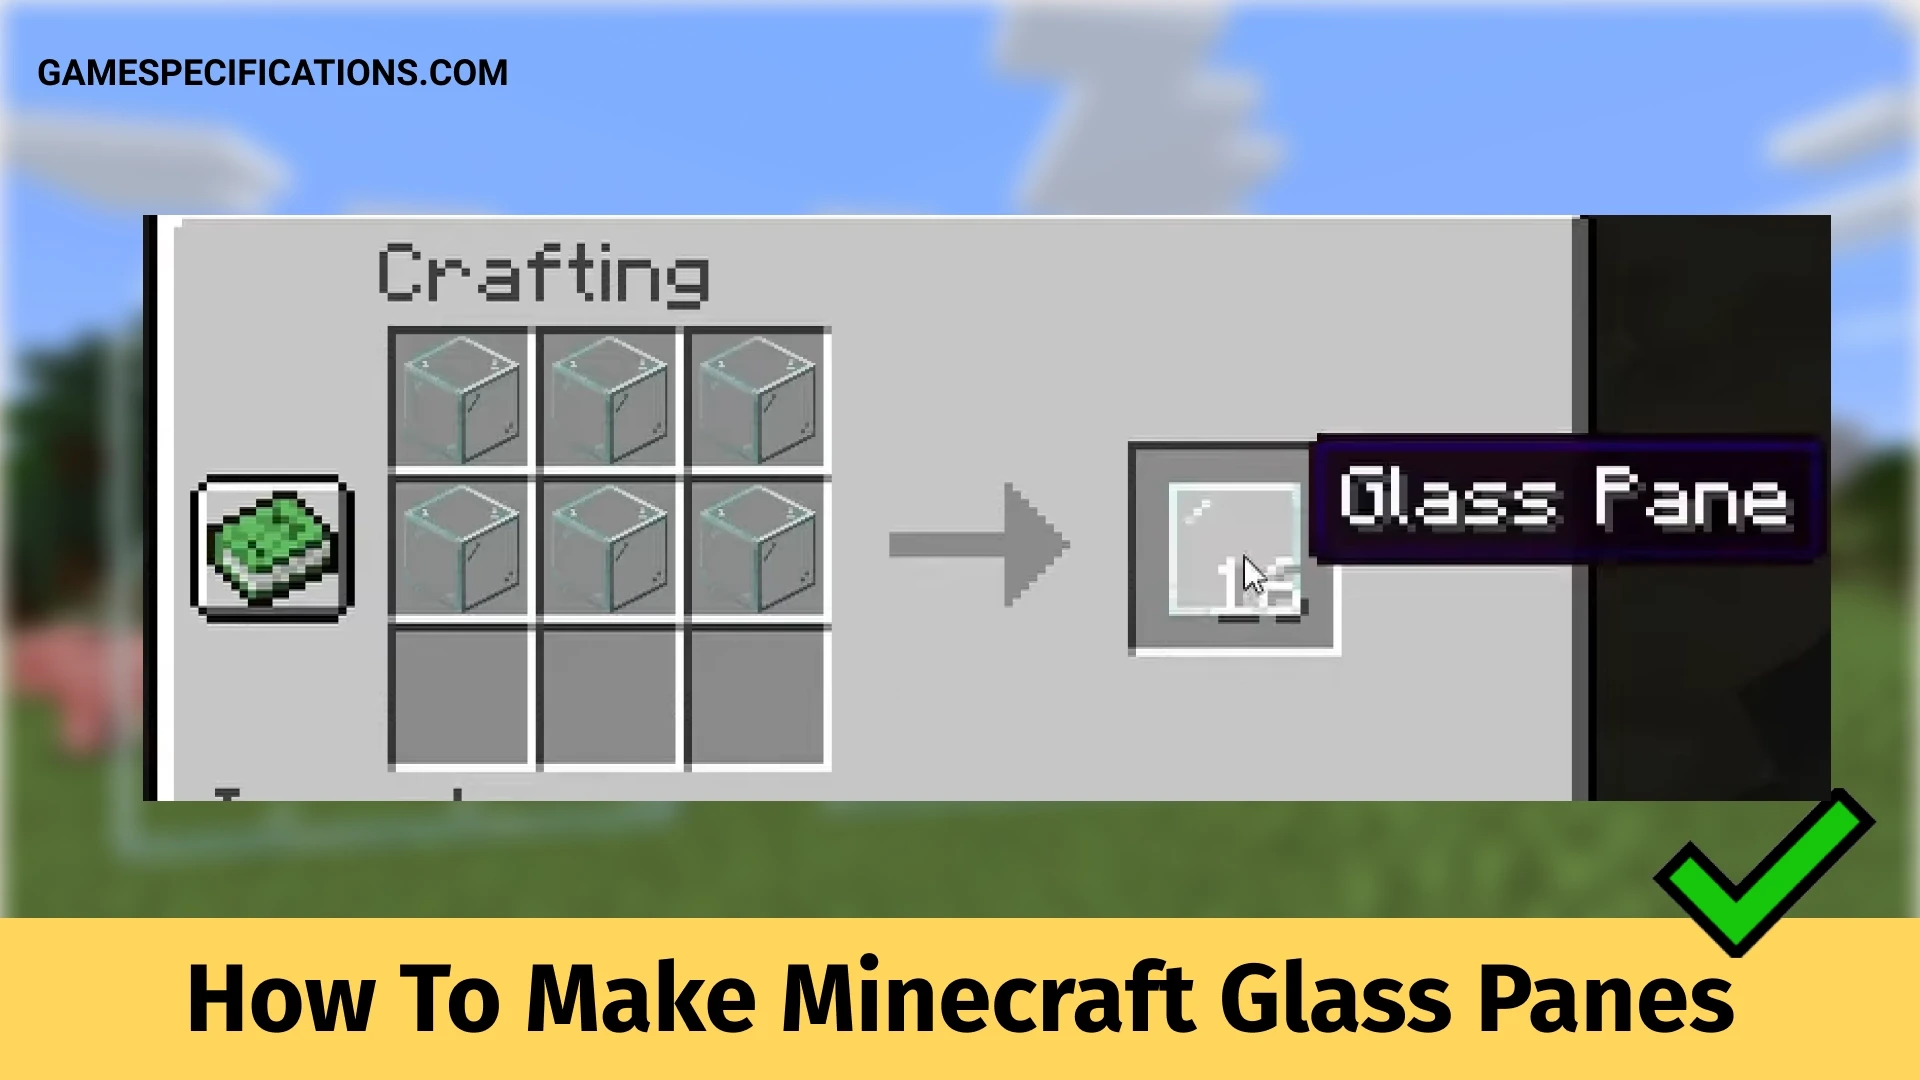 How To Make Minecraft Glass Panes Game Specifications